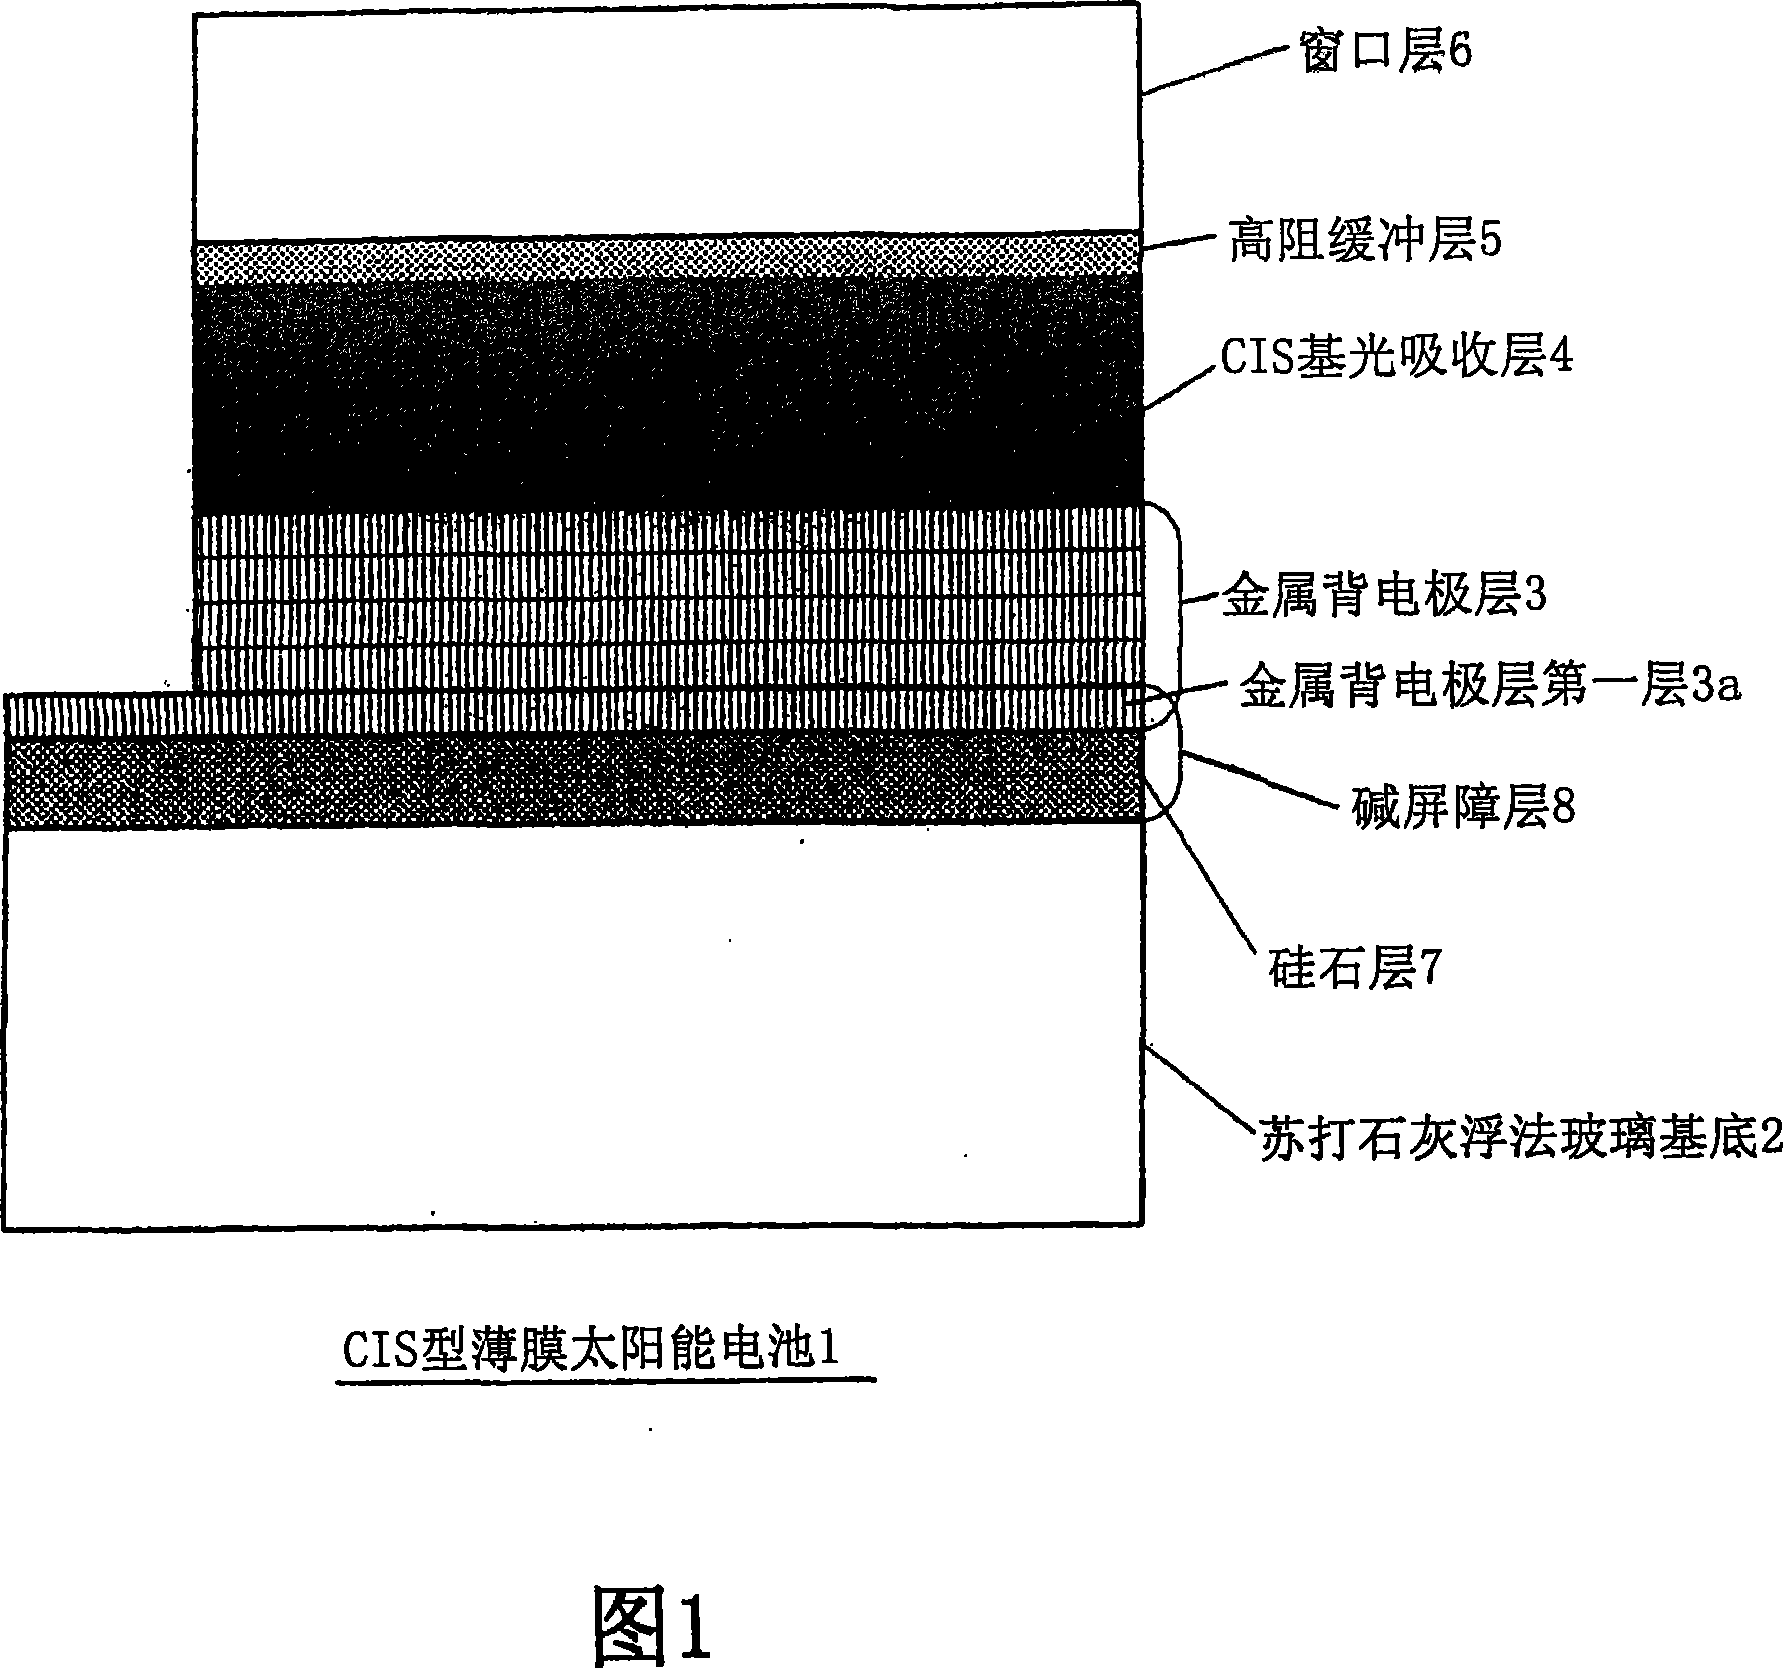 Cis-based thin film solar battery and process for producing the same